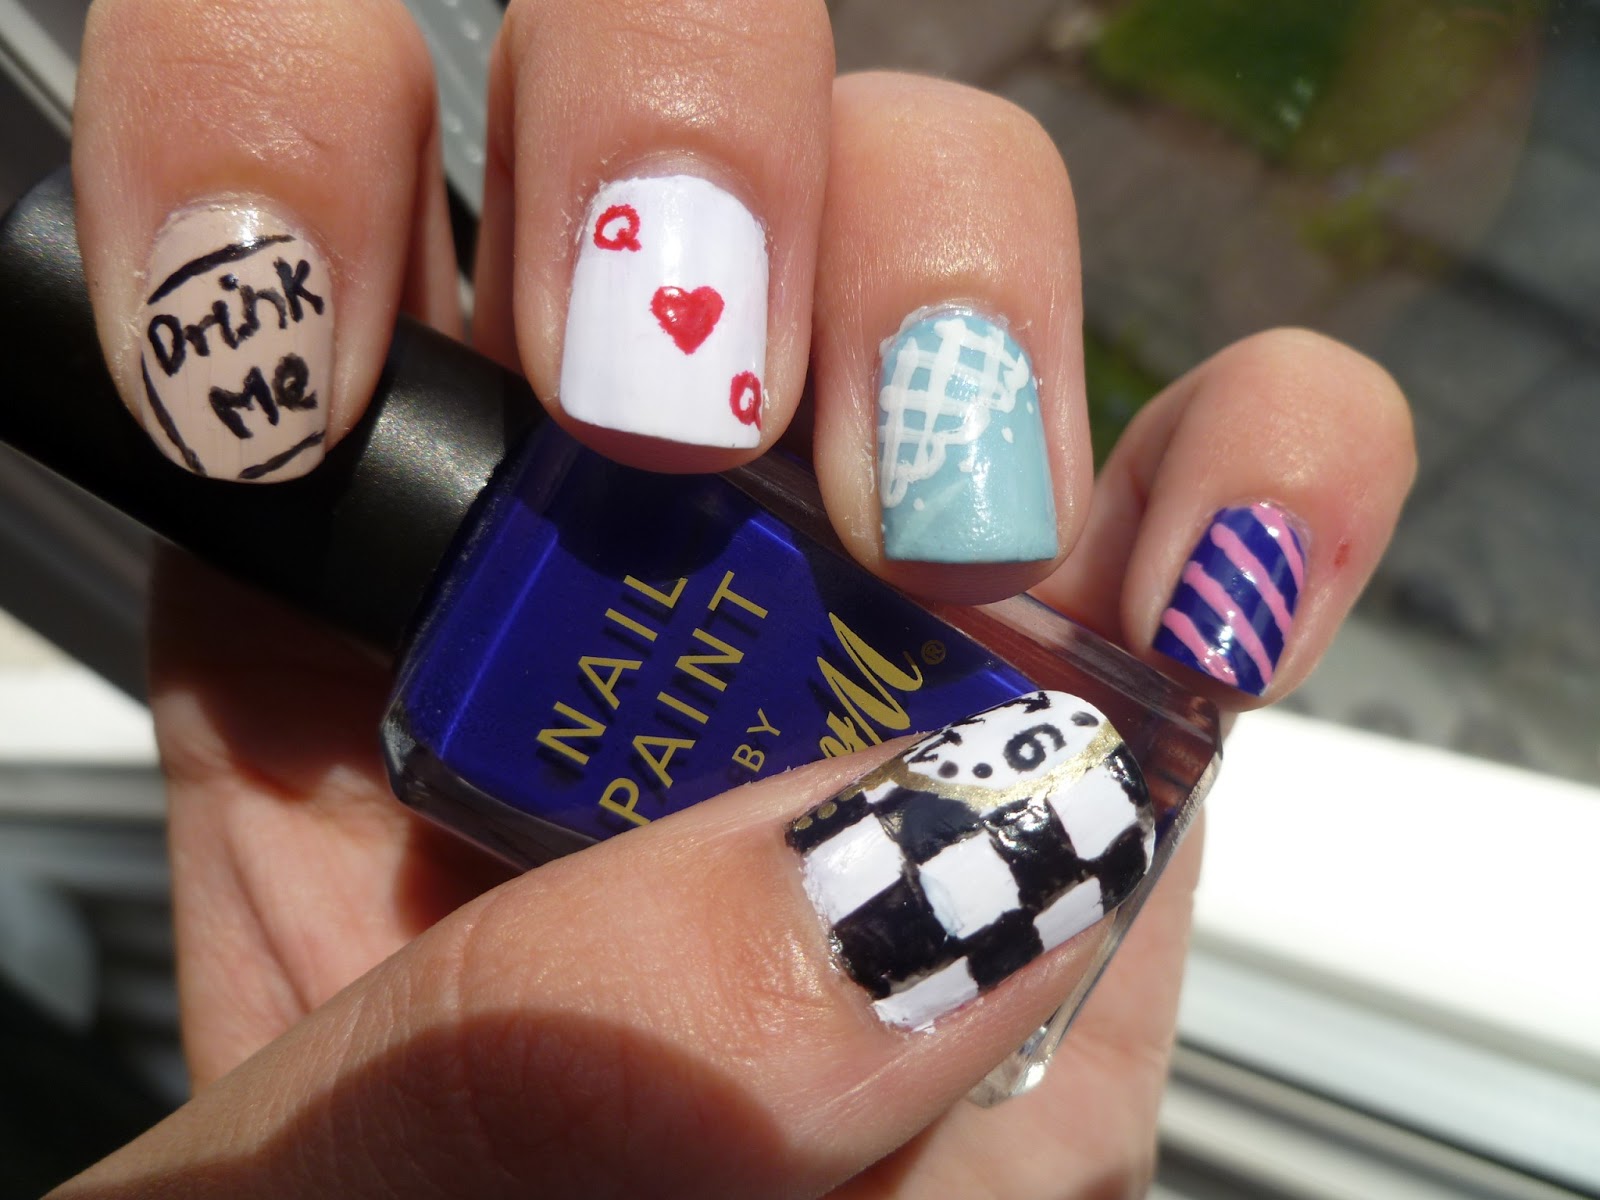 2. "Mad Hatter" inspired nail design by Nailed It NZ - wide 11